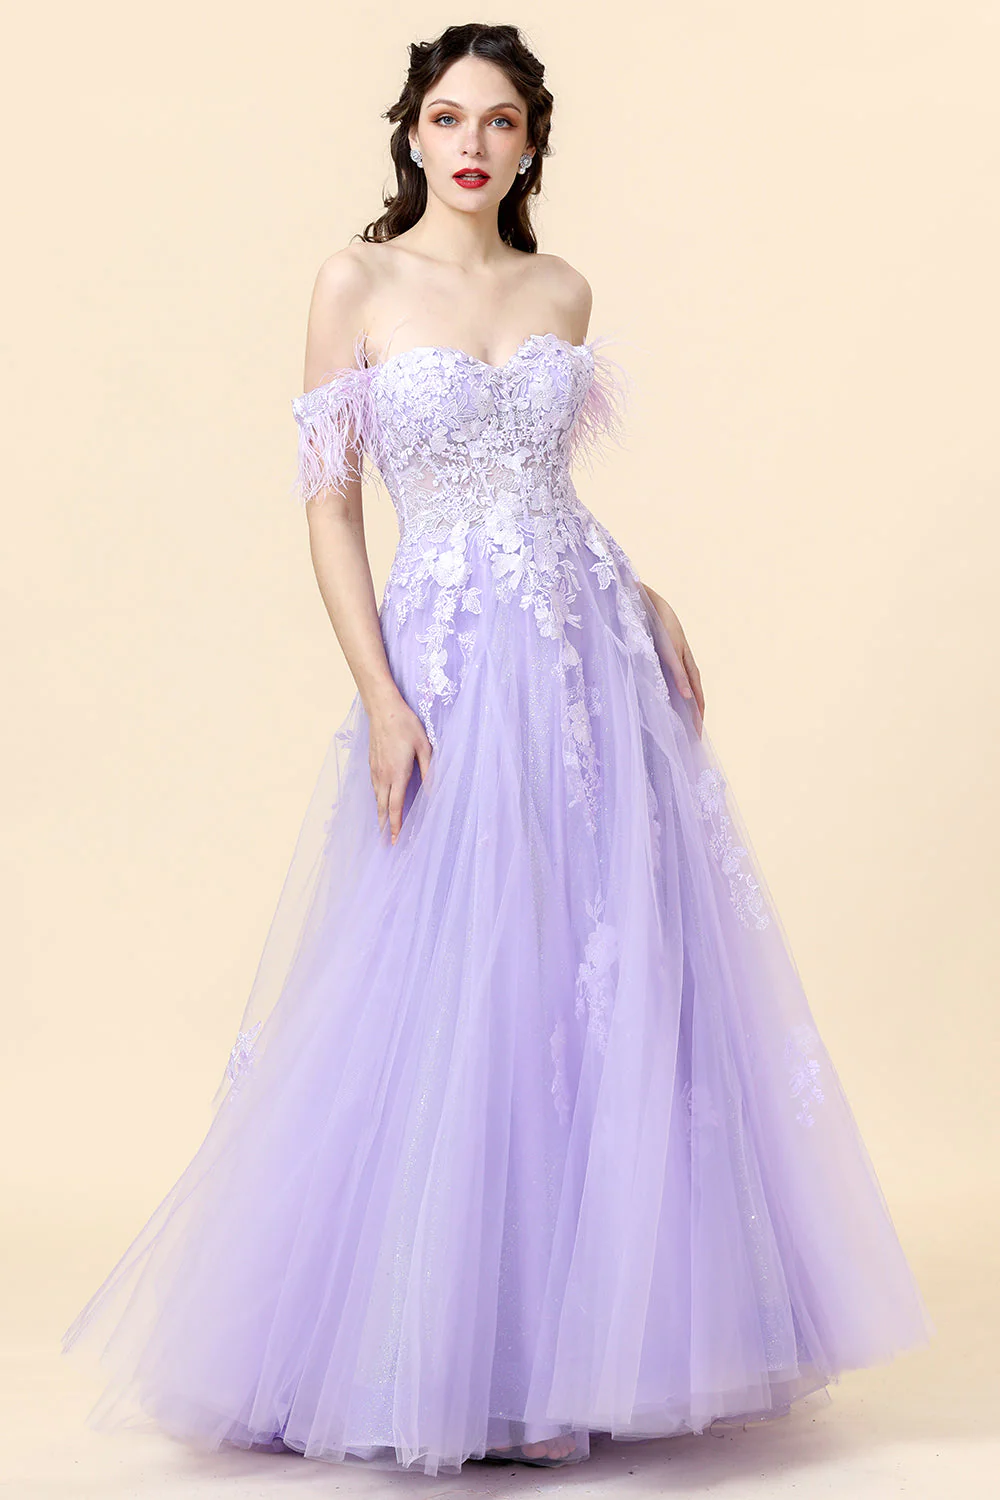 A Line Spaghetti Straps Long Purple Prom Dress with Appliques